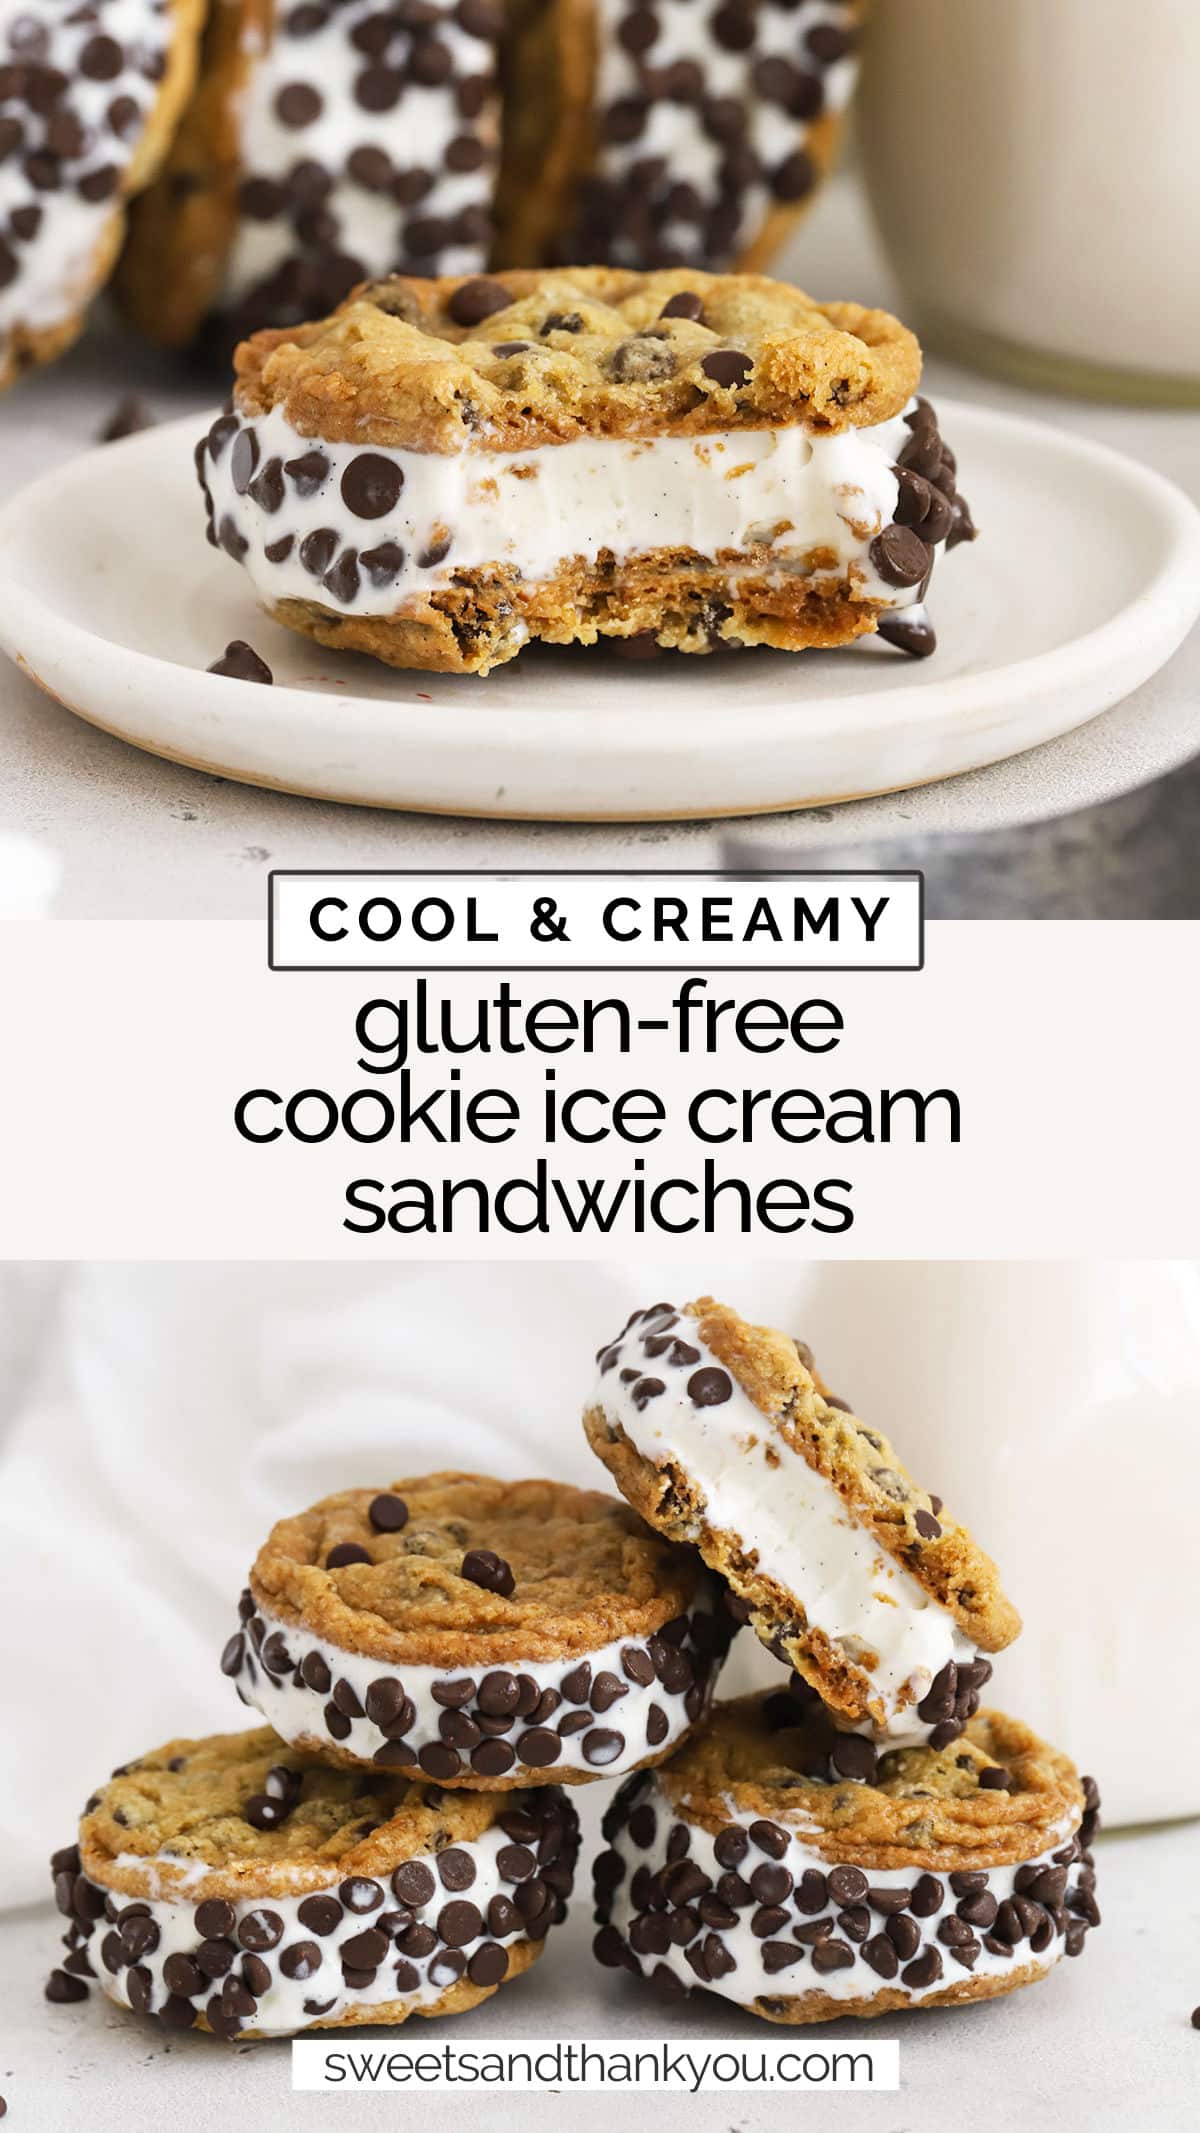 These gluten-free cookie ice cream sandwiches are such a fun dessert to cool off with. Try our classic combination or mix & match ice creams and toppings to create your own! / gluten free chipwich recipe / gluten-free cookie ice cream sandwich recipe / gluten free summer dessert / gluten free ice cream dessert recipe / gluten free ice cream sandwiches with cookies / gluten-free chocolate chip cookie ice cream sandwiches / 